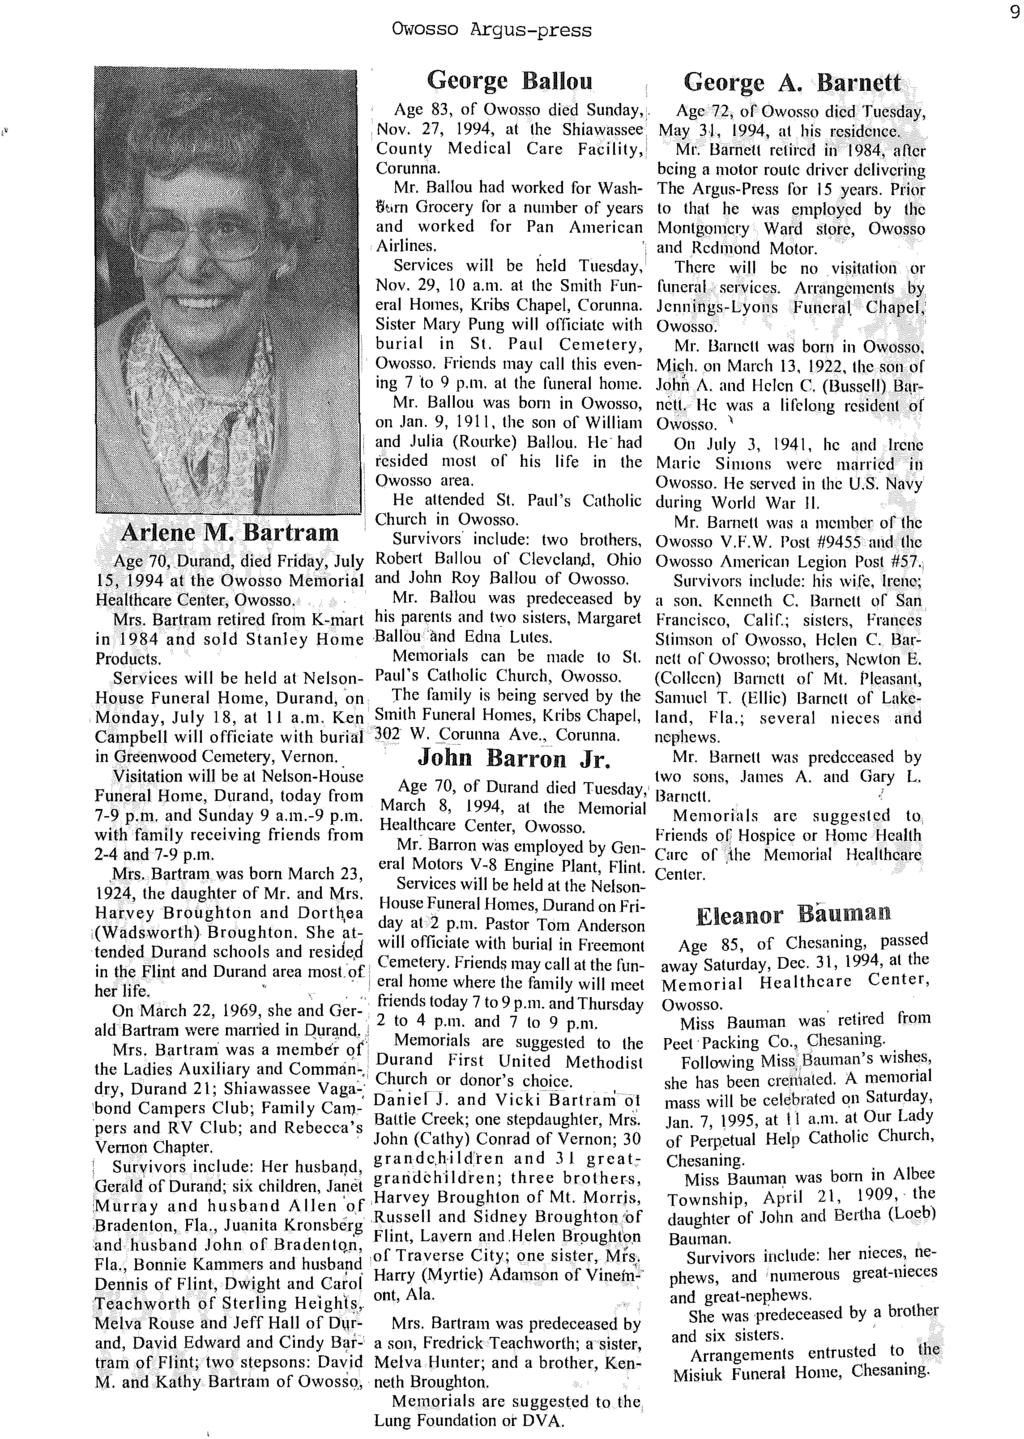 Owosso Argus-press 9 George Ballou George A. Barnett Age 83, of Owosso died Sunday,. Age 72, of Owosso died Tuesday, Nov. 27, 1994, at the Shiawassee May 31, 1994, at his residence.